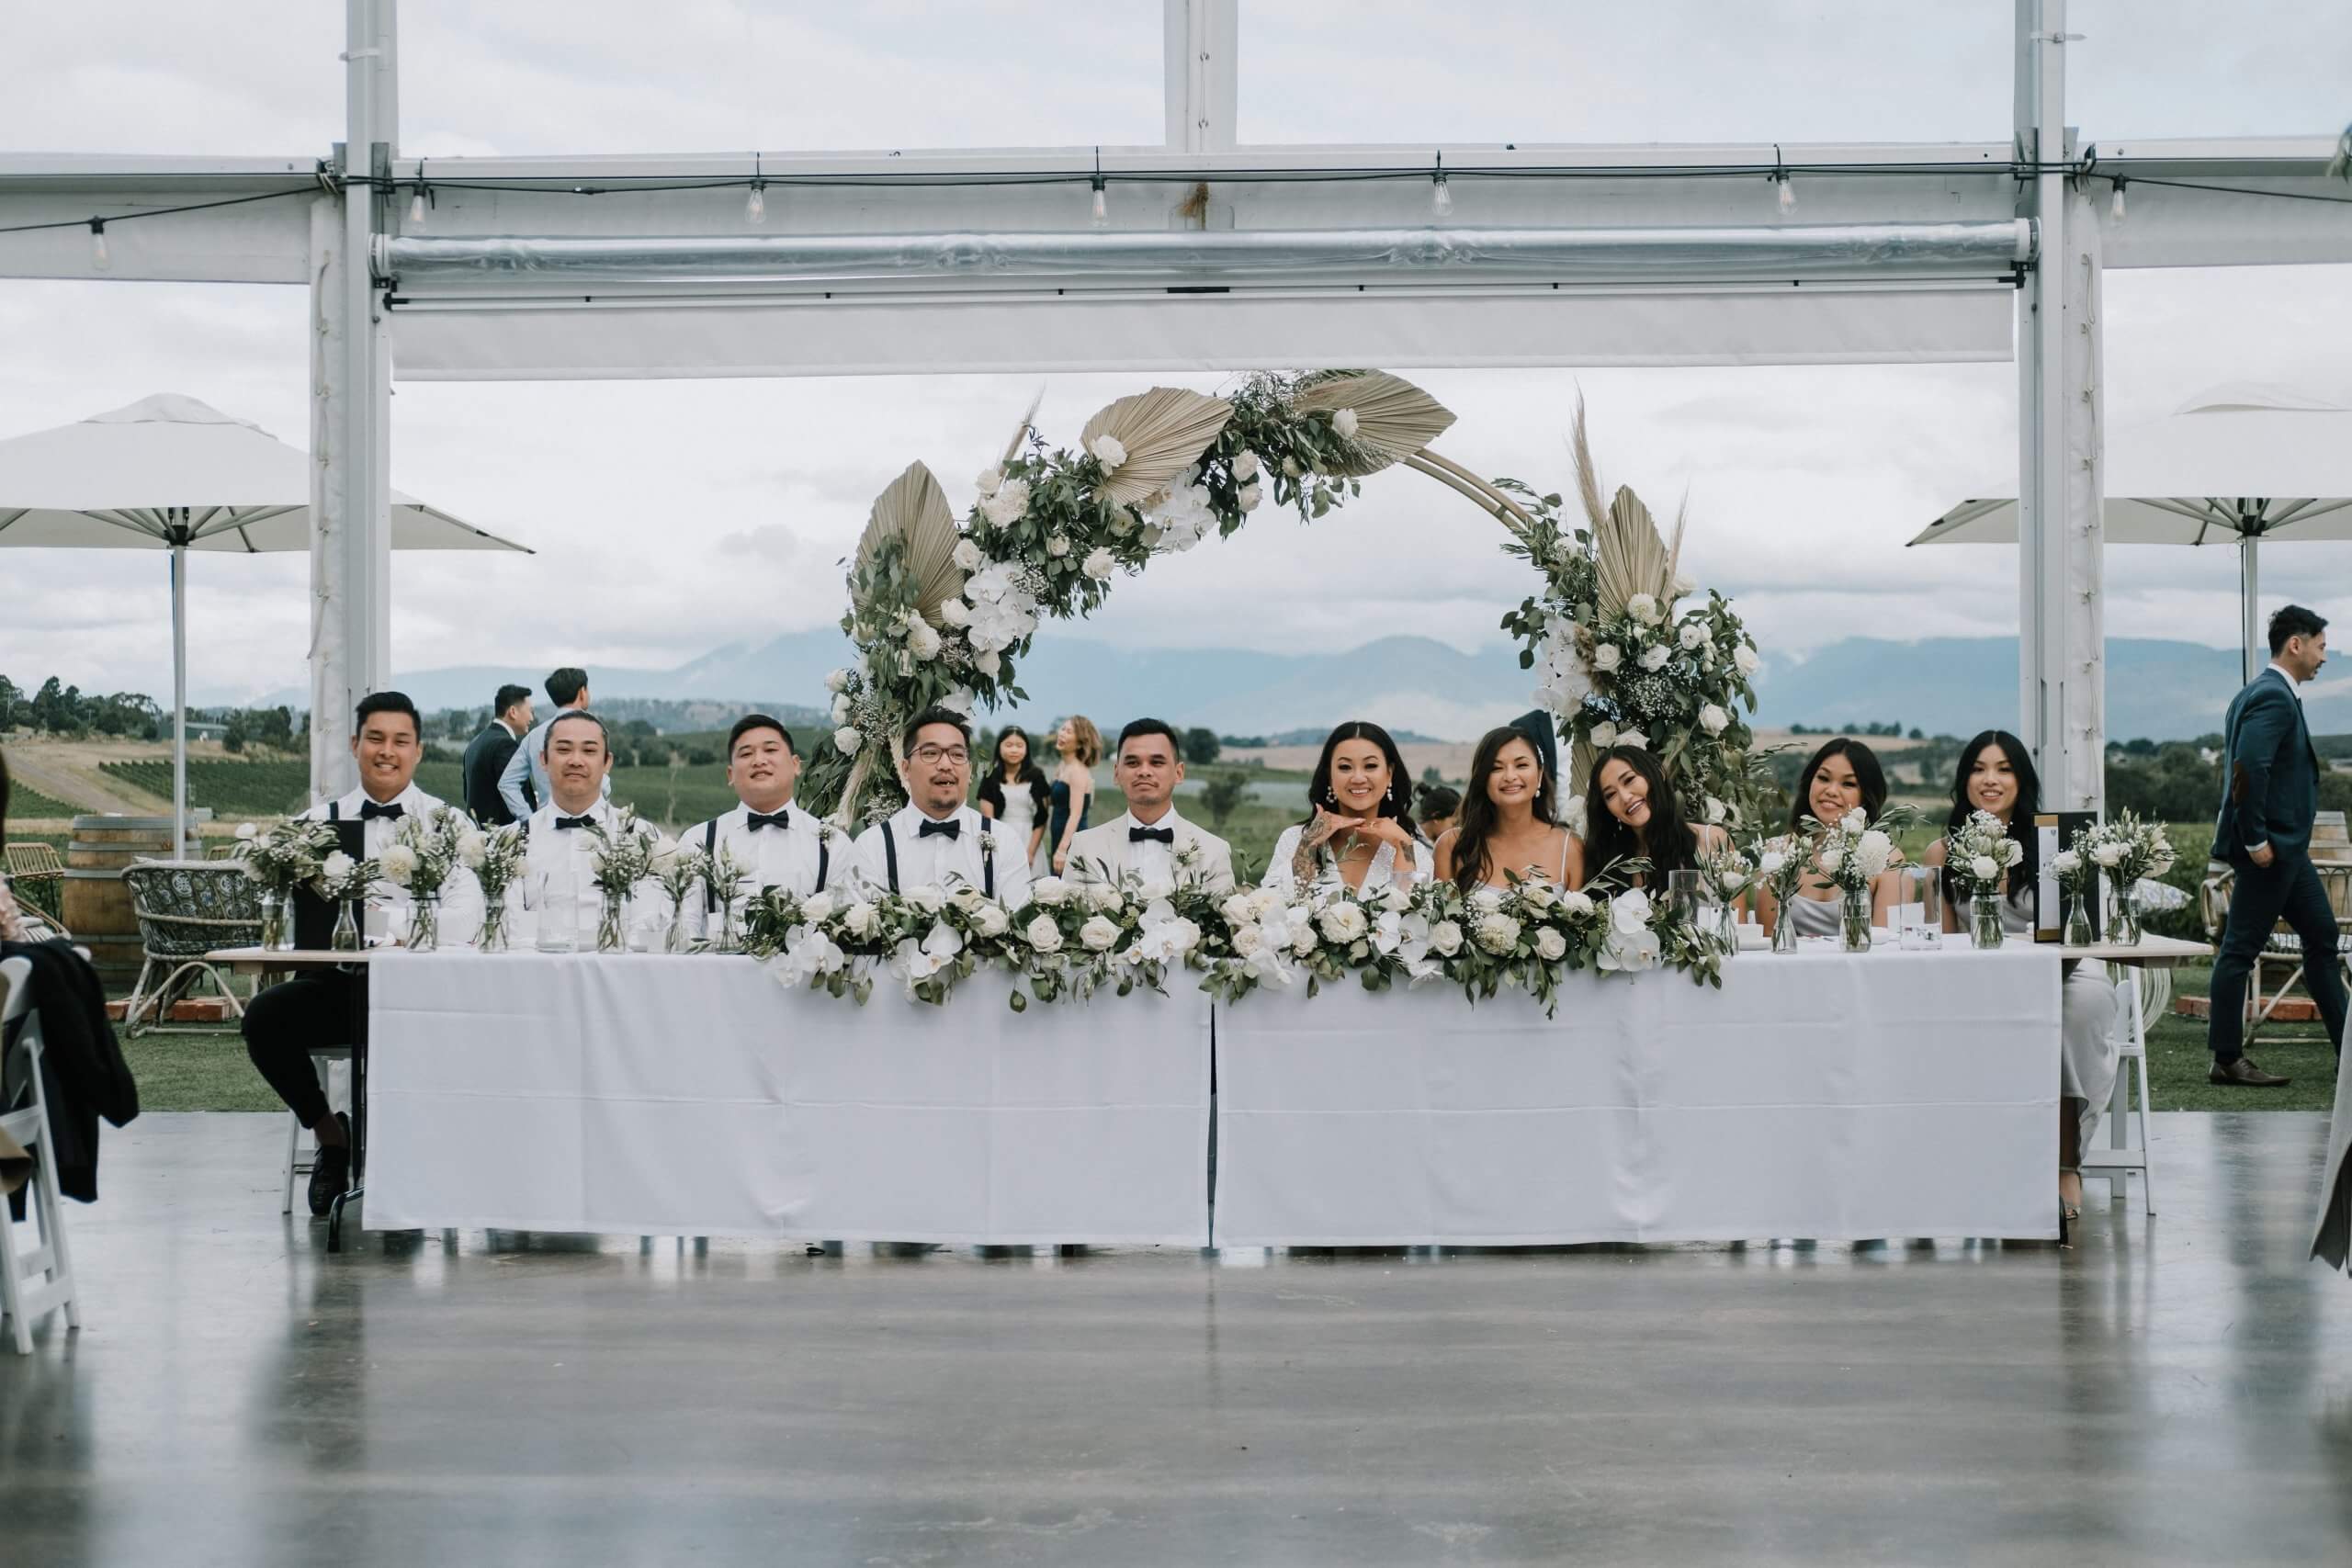 With an open venue for the reception, and the beautiful winery as the background, the bridal party smiles for the camera